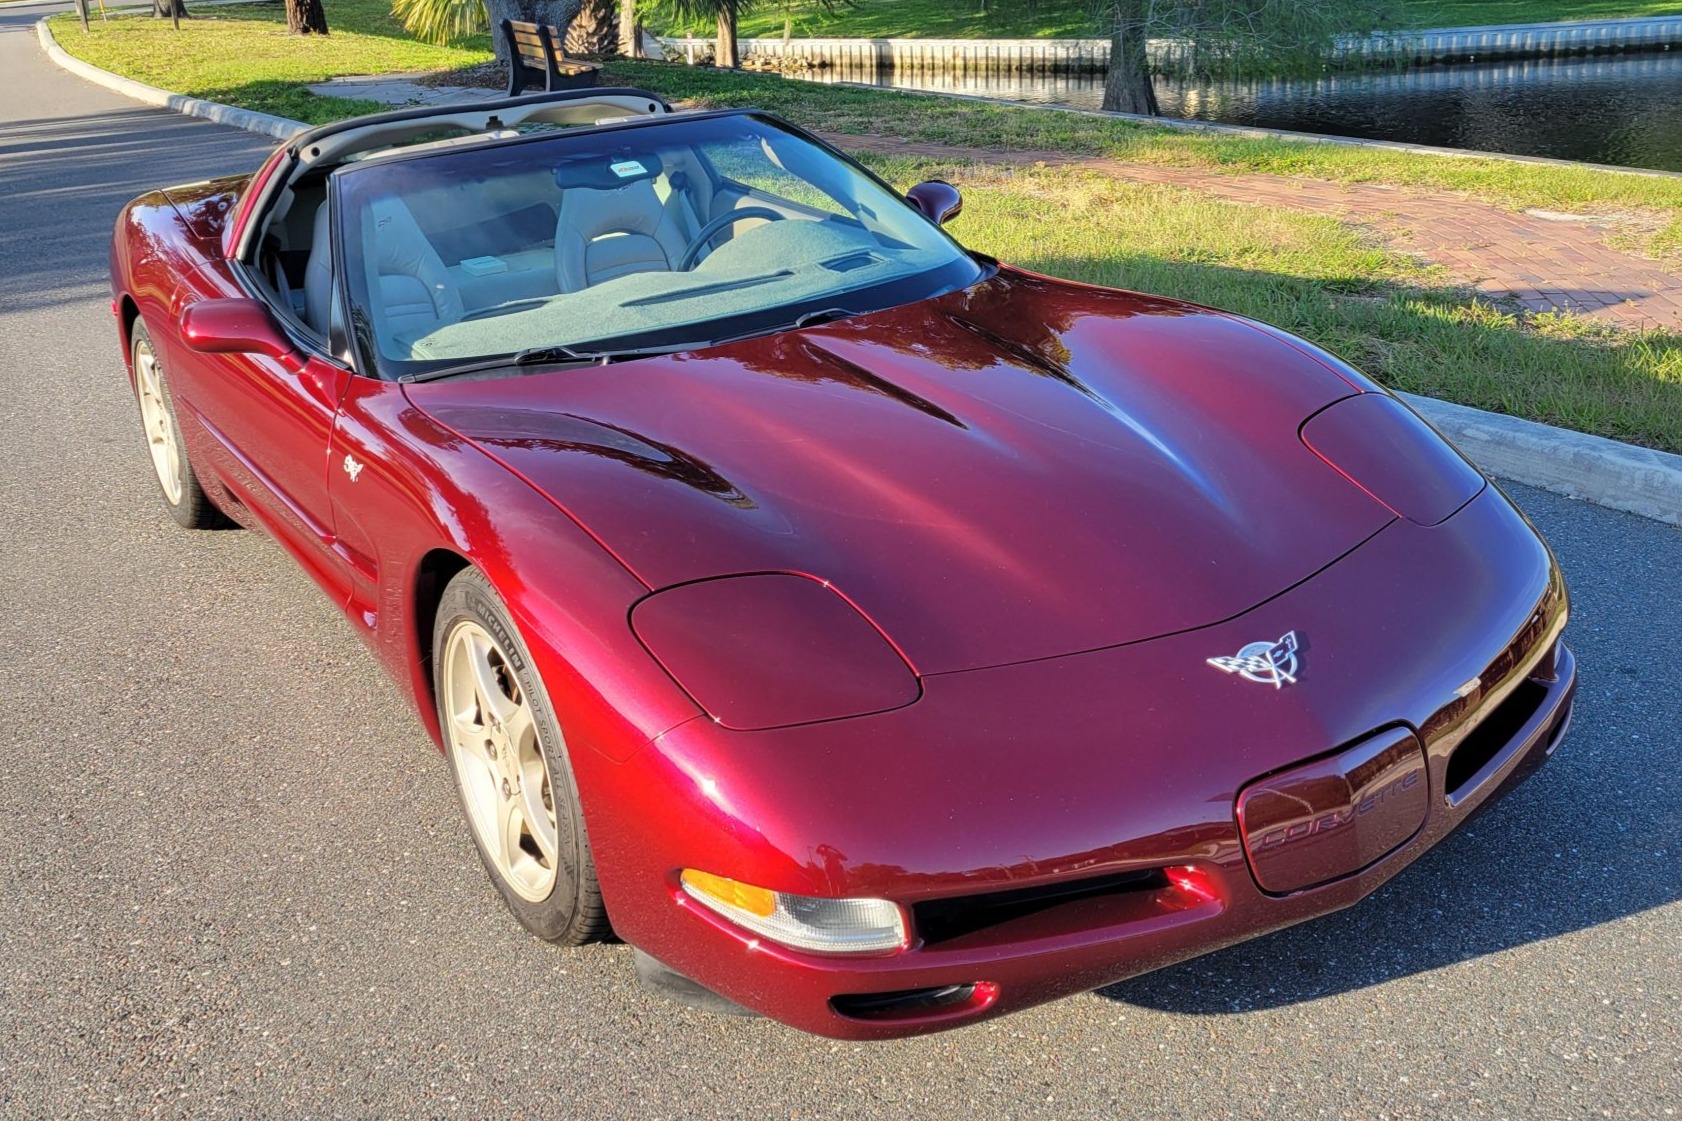 Used 40k-Mile 2003 Chevrolet Corvette Coupe 50th Anniversary Edition 6-Speed Review